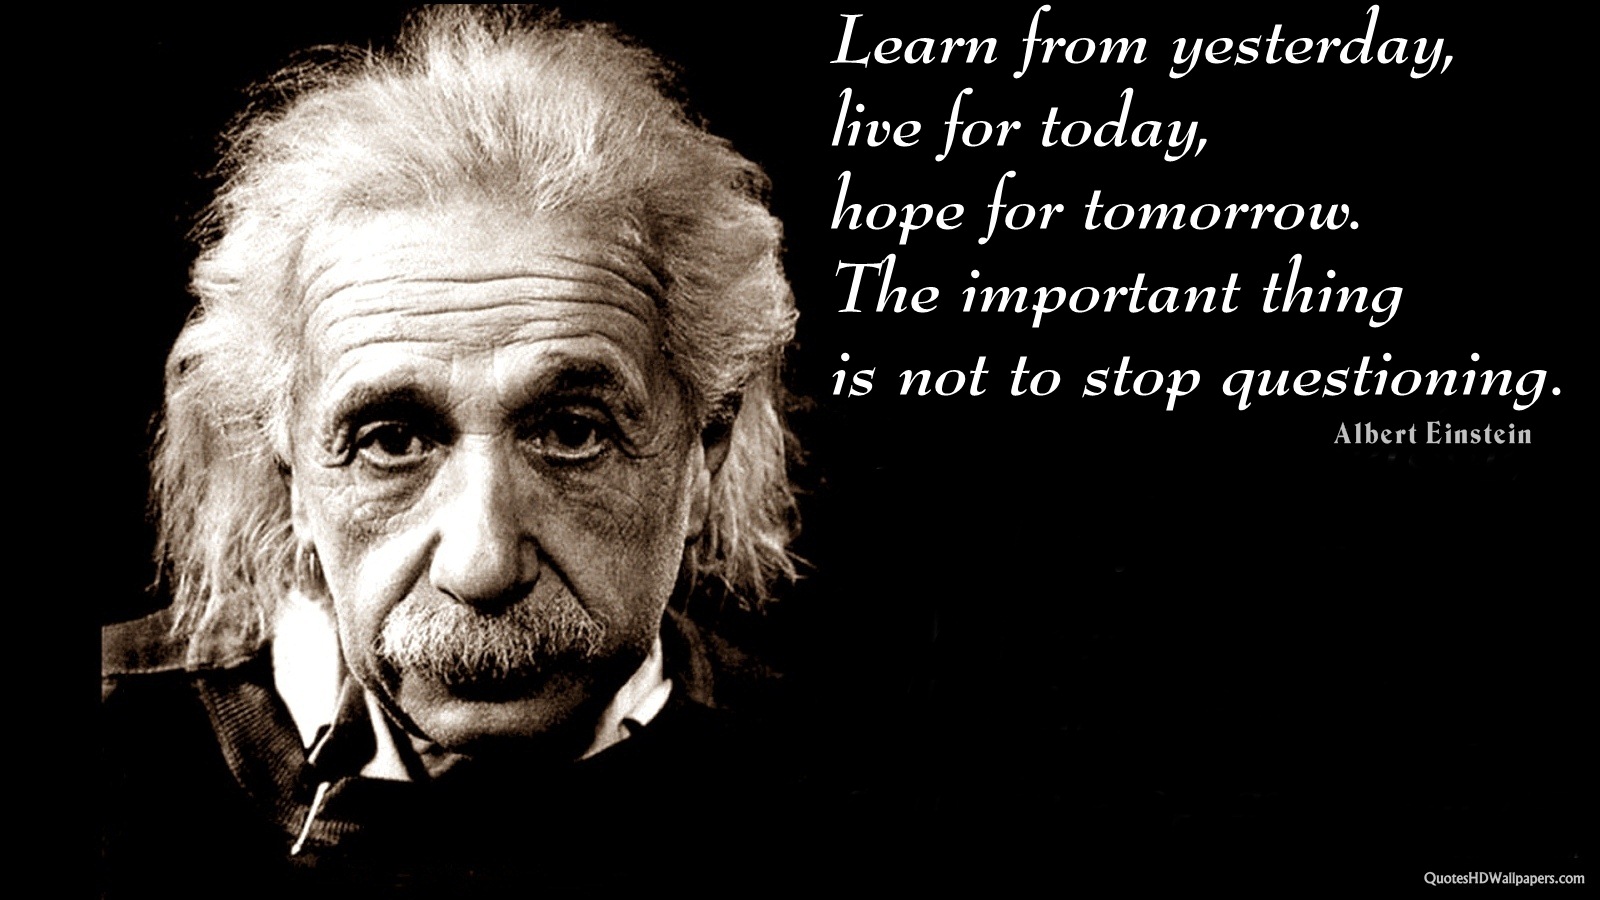 Albert Einstein Education Quotes Learning. QuotesGram
 Quotes About Education Albert Einstein